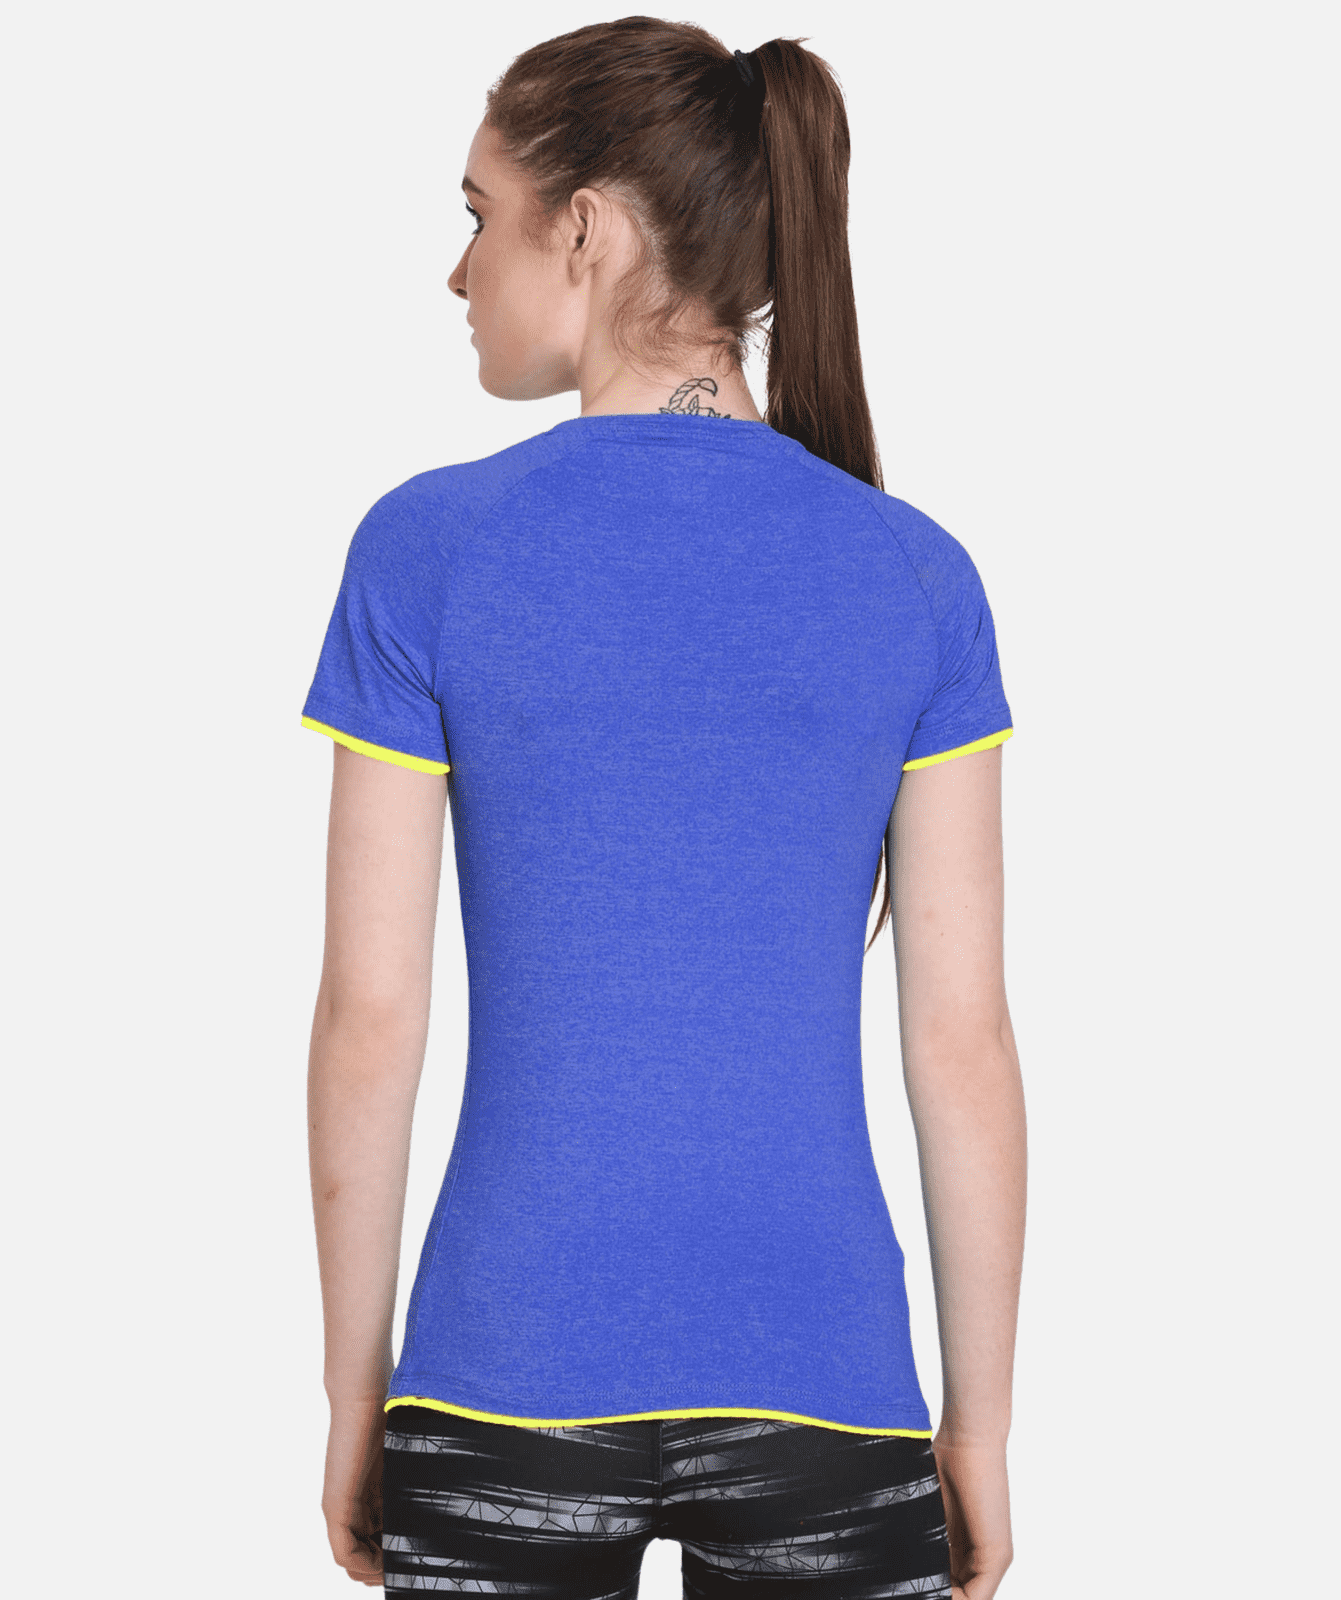 Sports T-shirt for Girls | Airy and Stretchable | Feather Feel Women's Upper